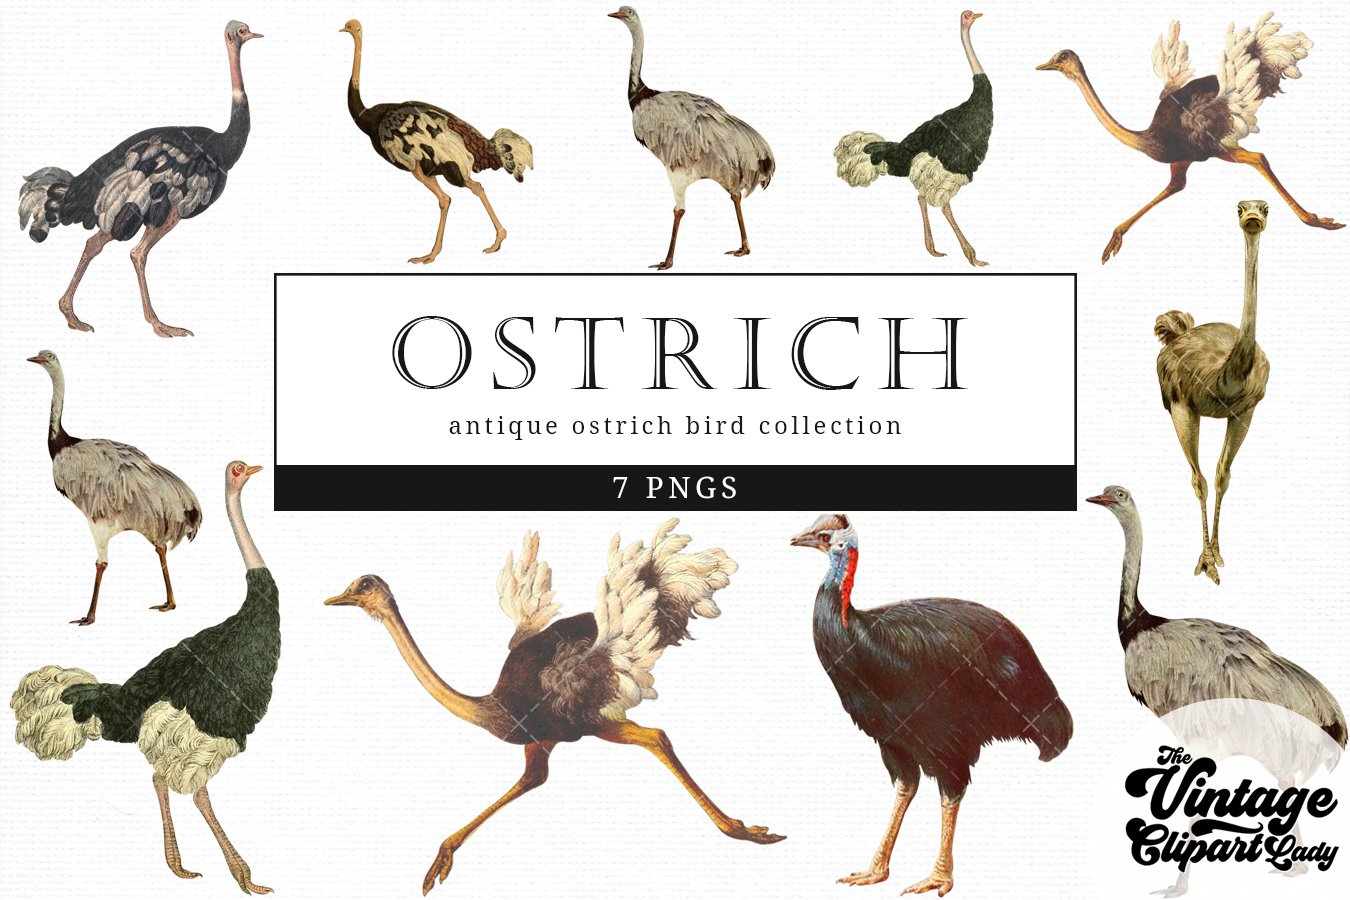 Realistic ostrich in a vintage style.